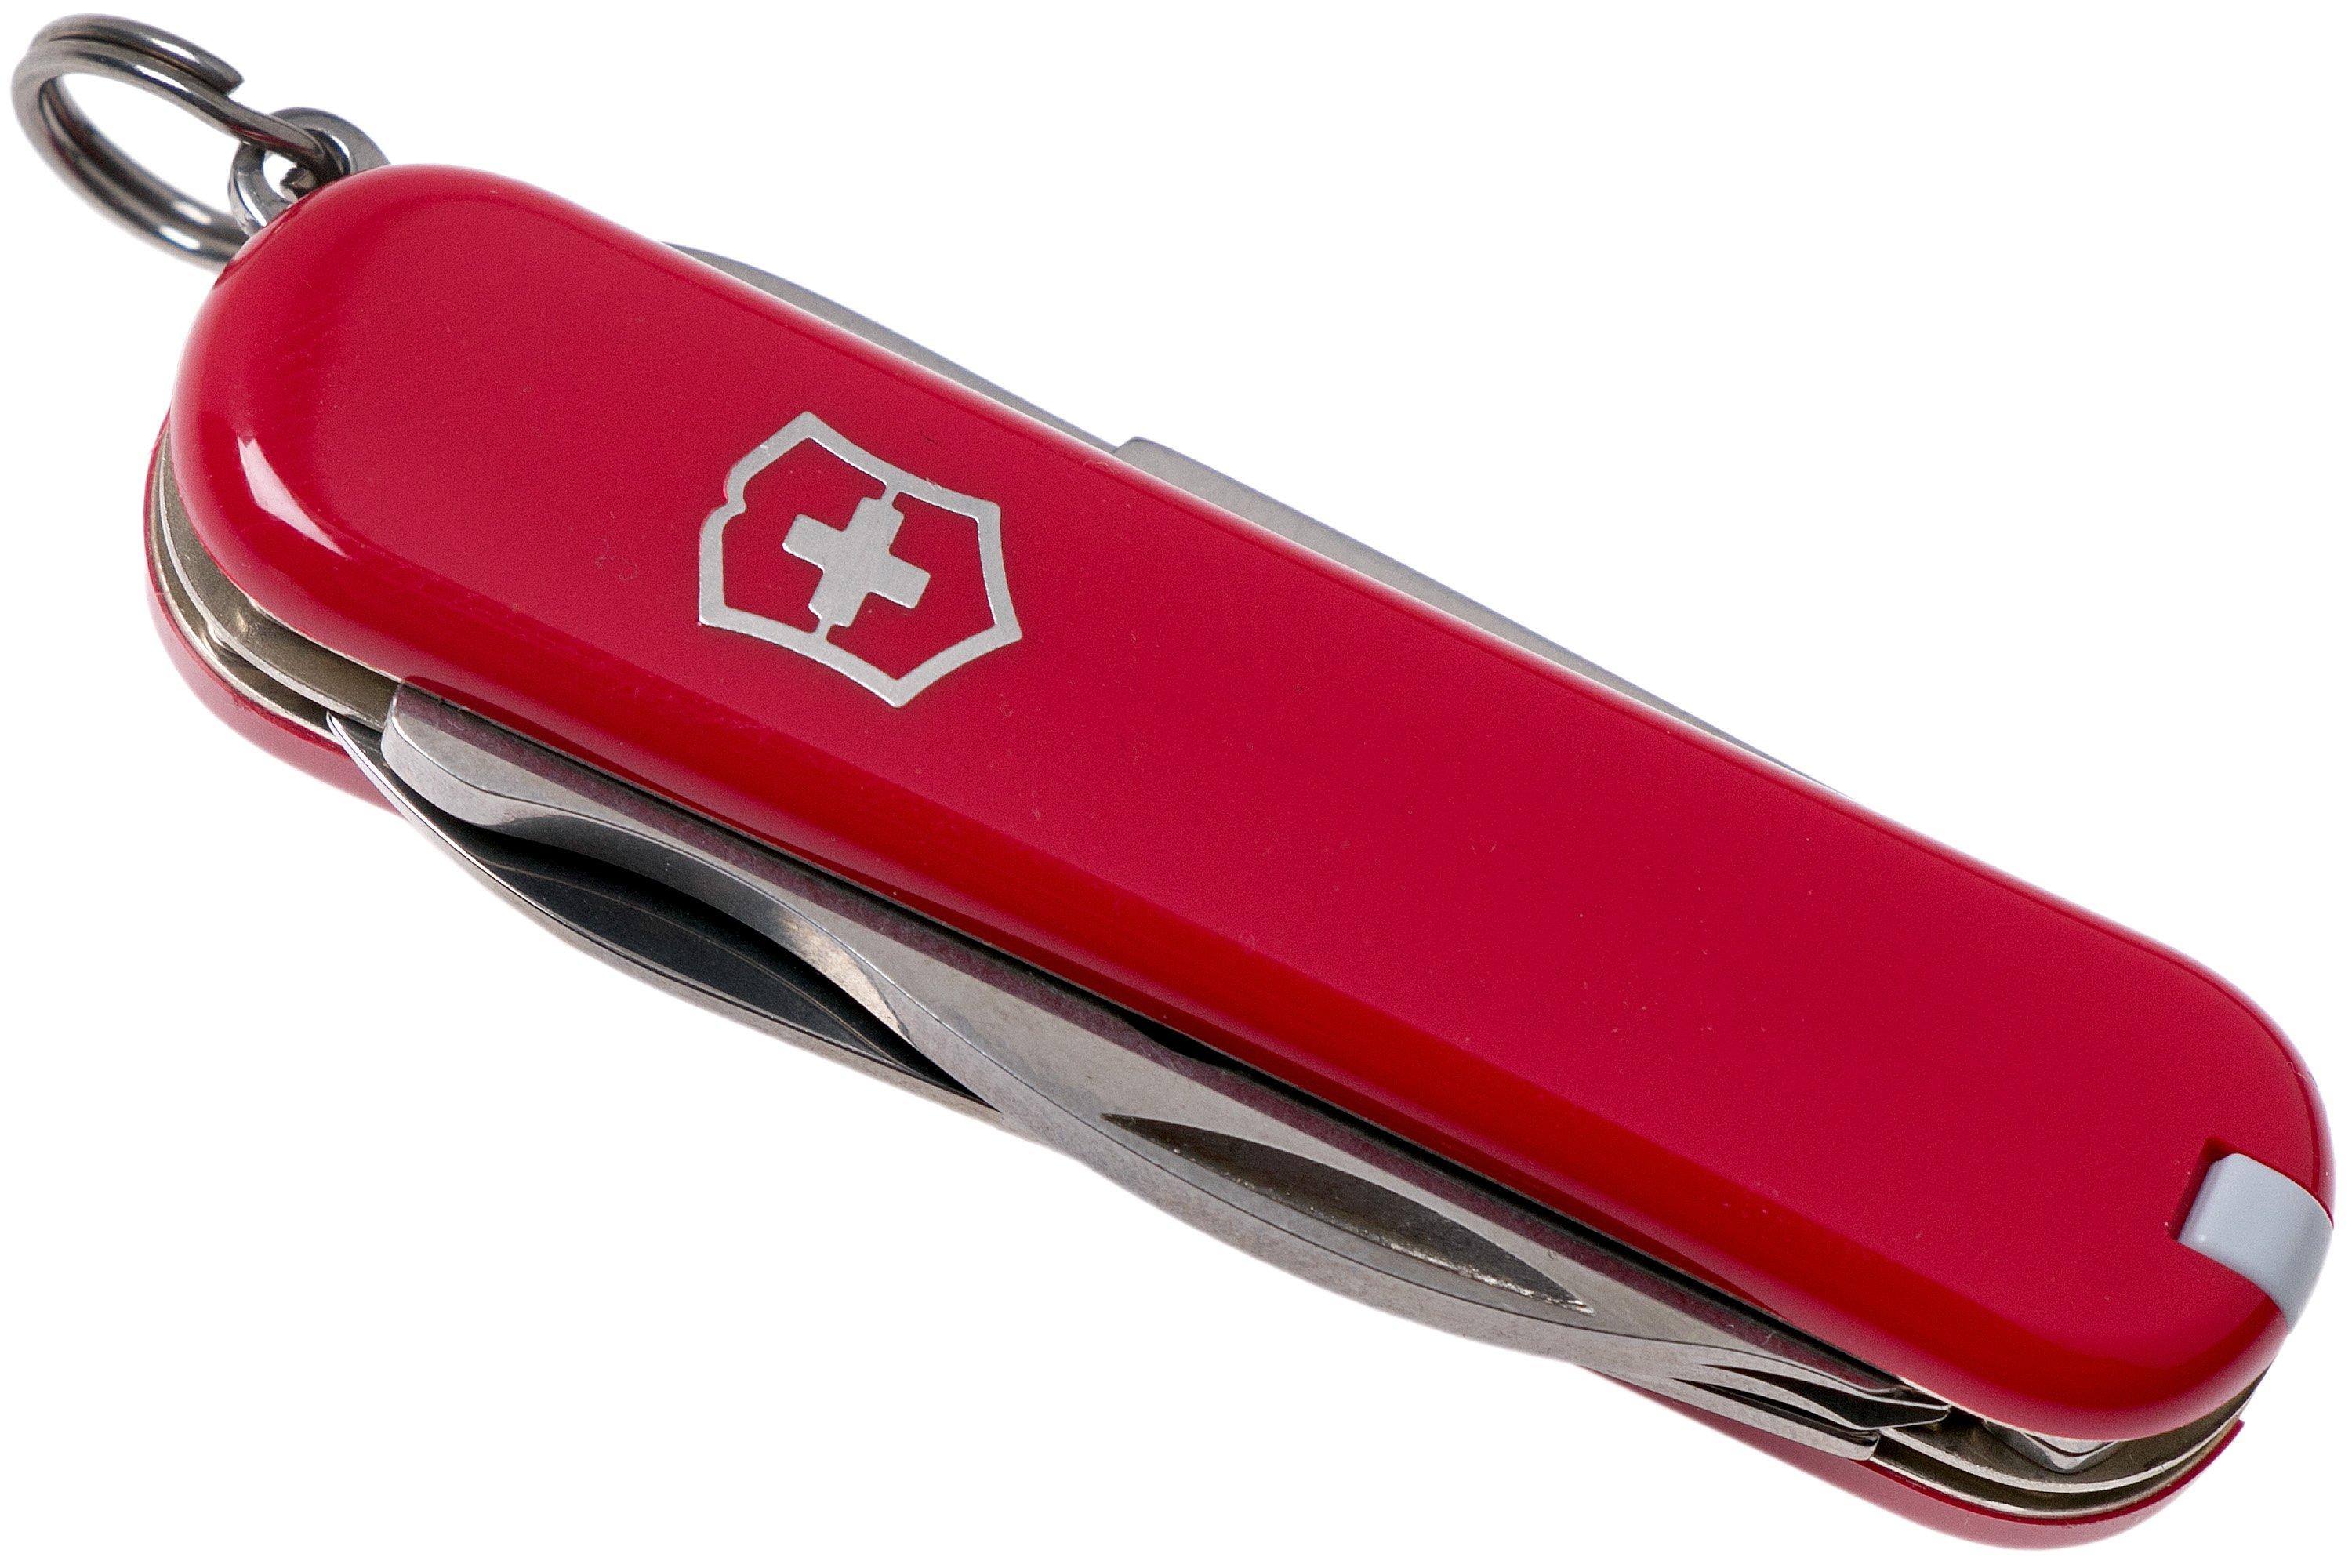 Victorinox　shopping　at　Manager,　knife,　red　Swiss　pocket　Advantageously